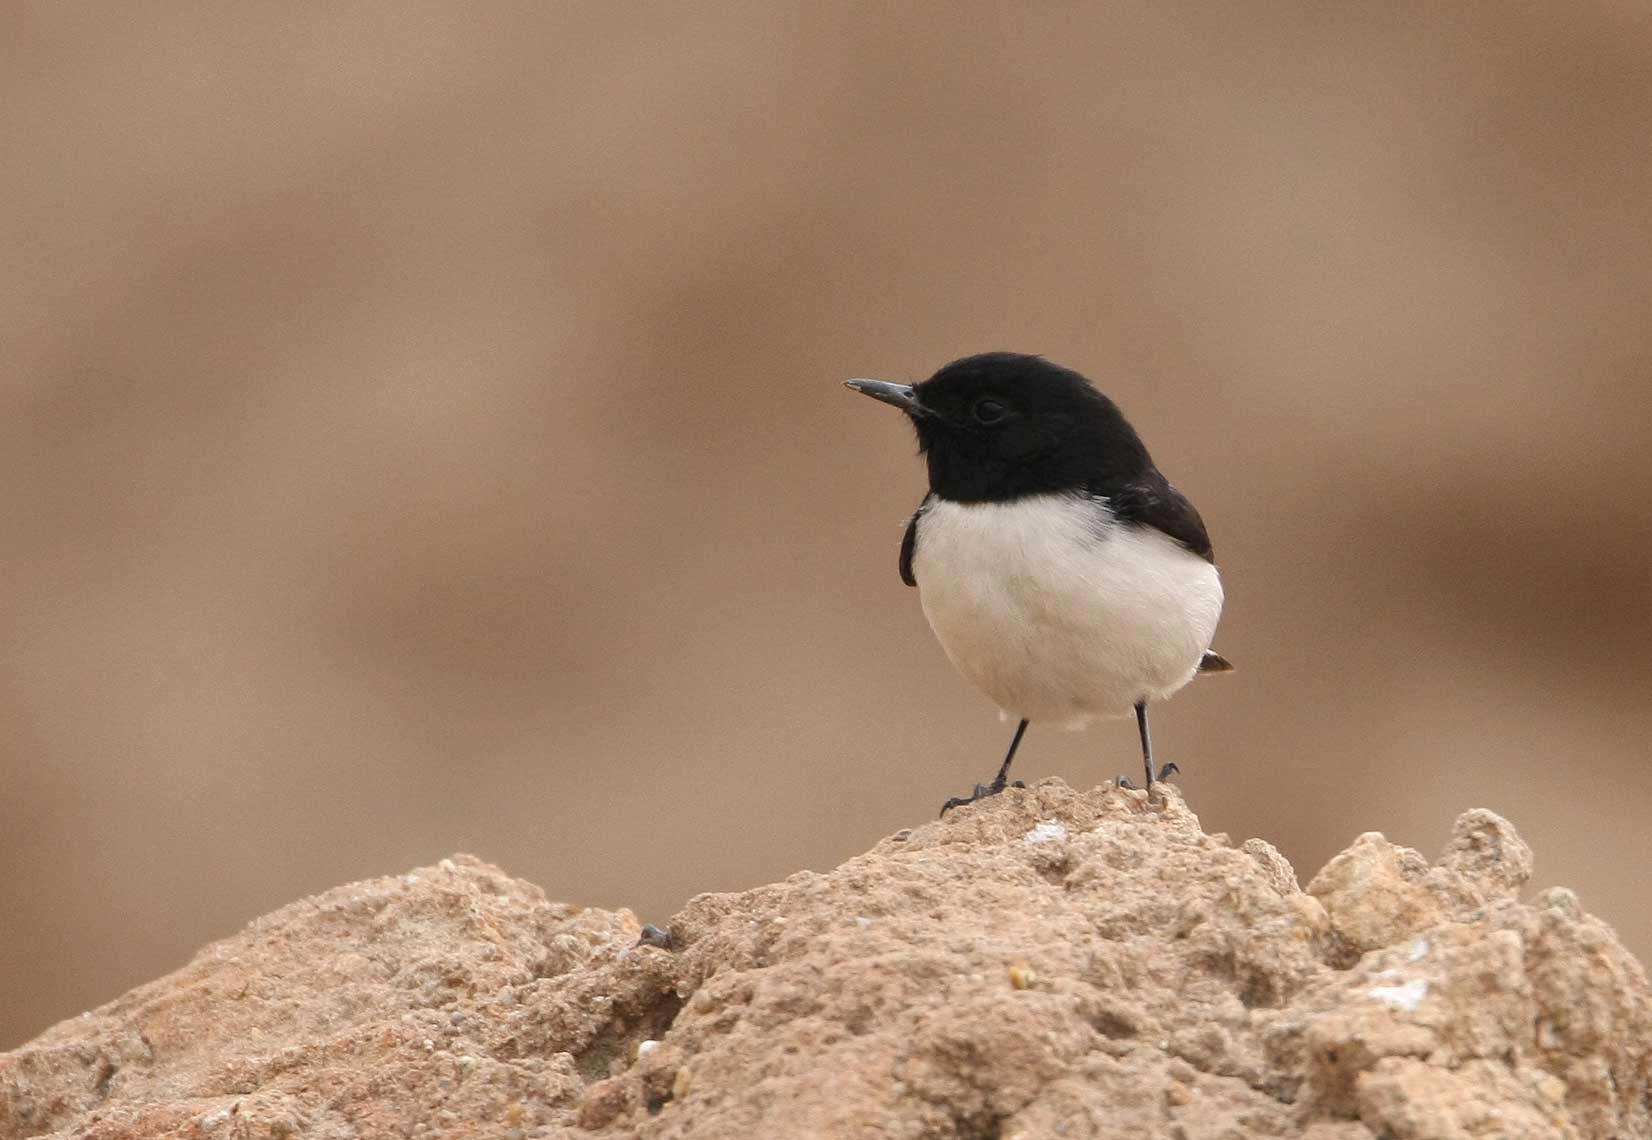 Hume’s Wheatear perched on a mound